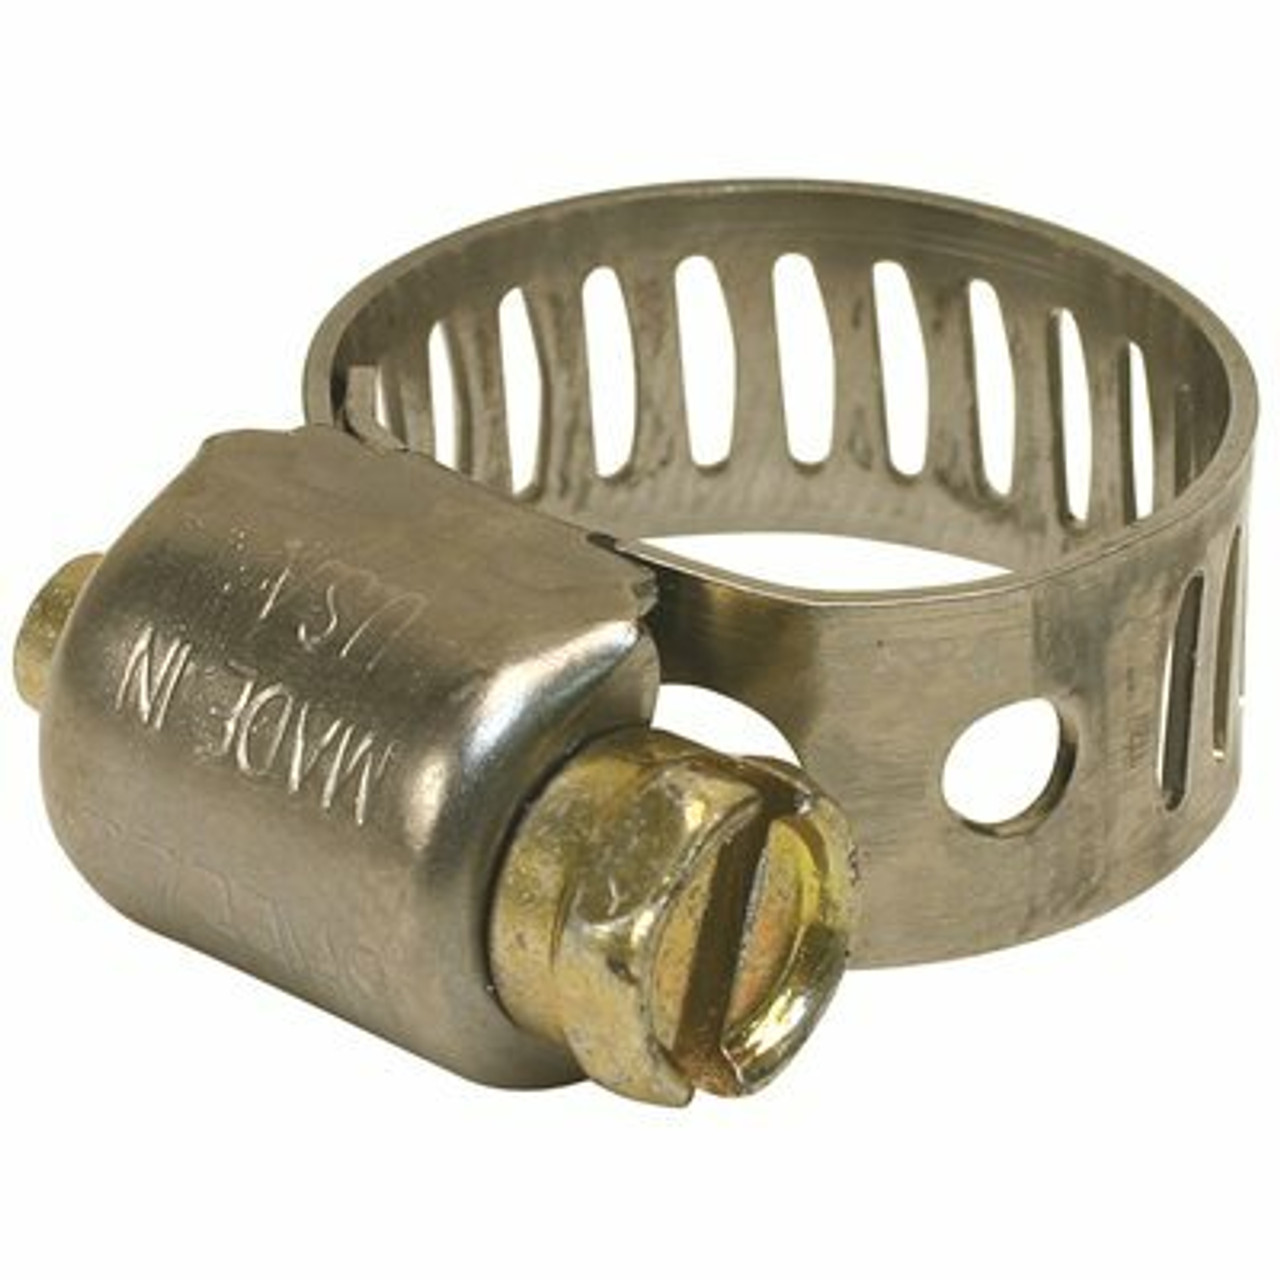 Breeze Clamp Hose Clamp 7/8 In. To 1-3/4 In.